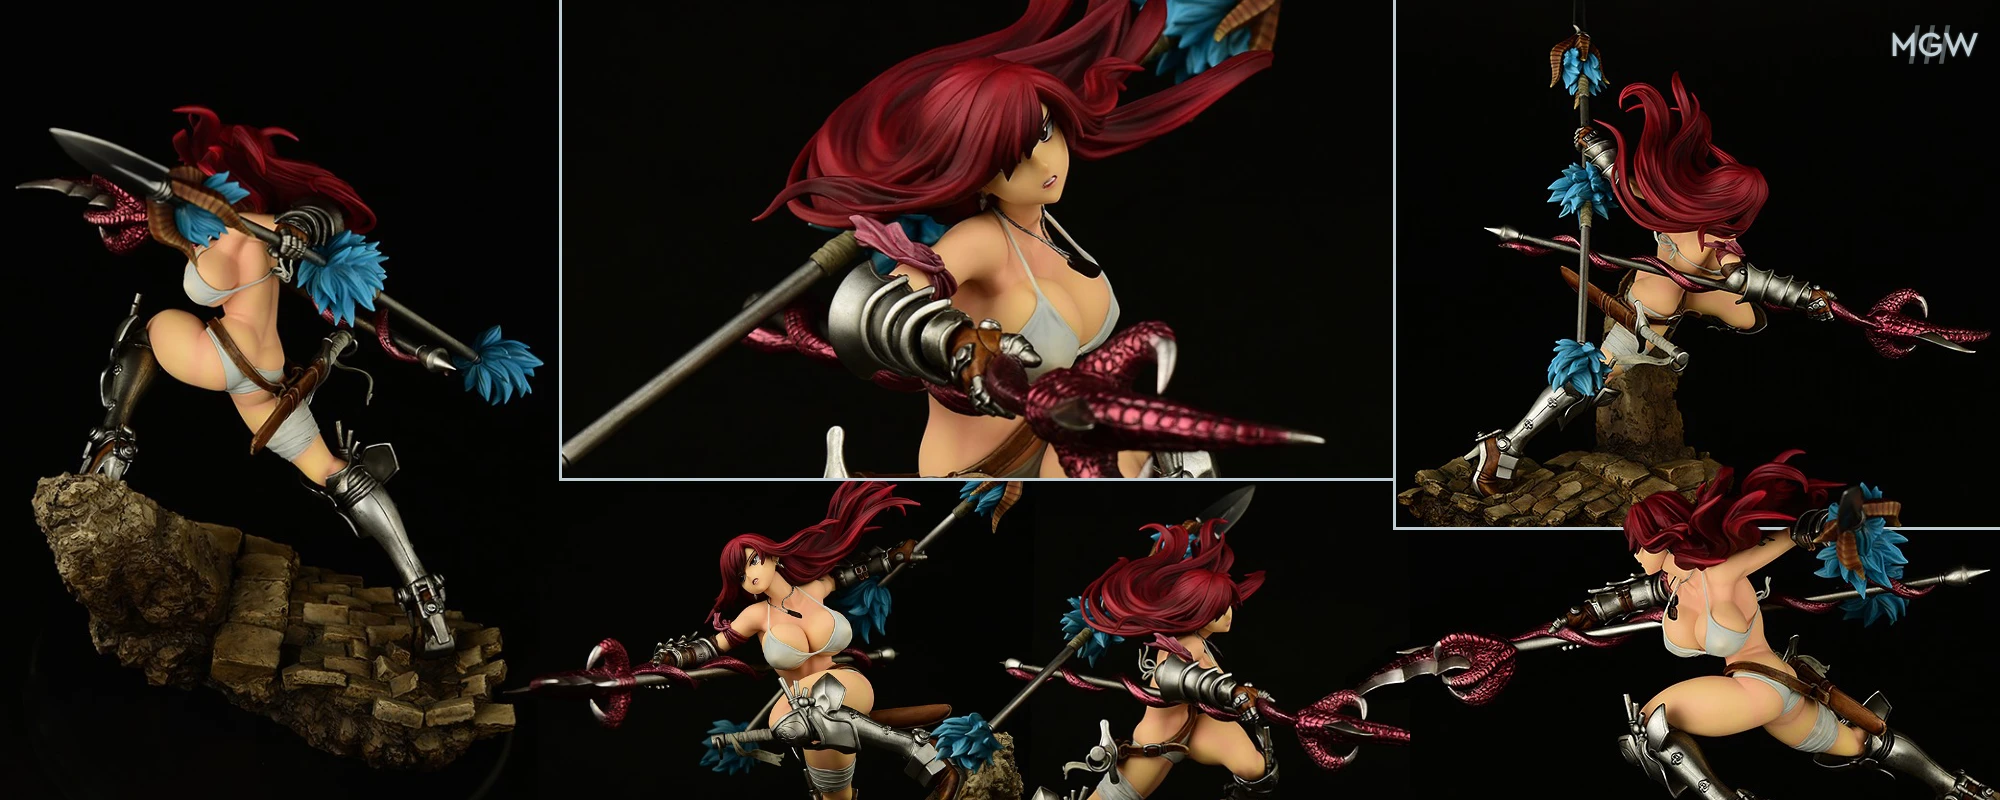 Erza Scarlet the Knight ver. Refine 2022 by OrcaToys from FAIRY TAIL MyGrailWatch Anime Figure Guide